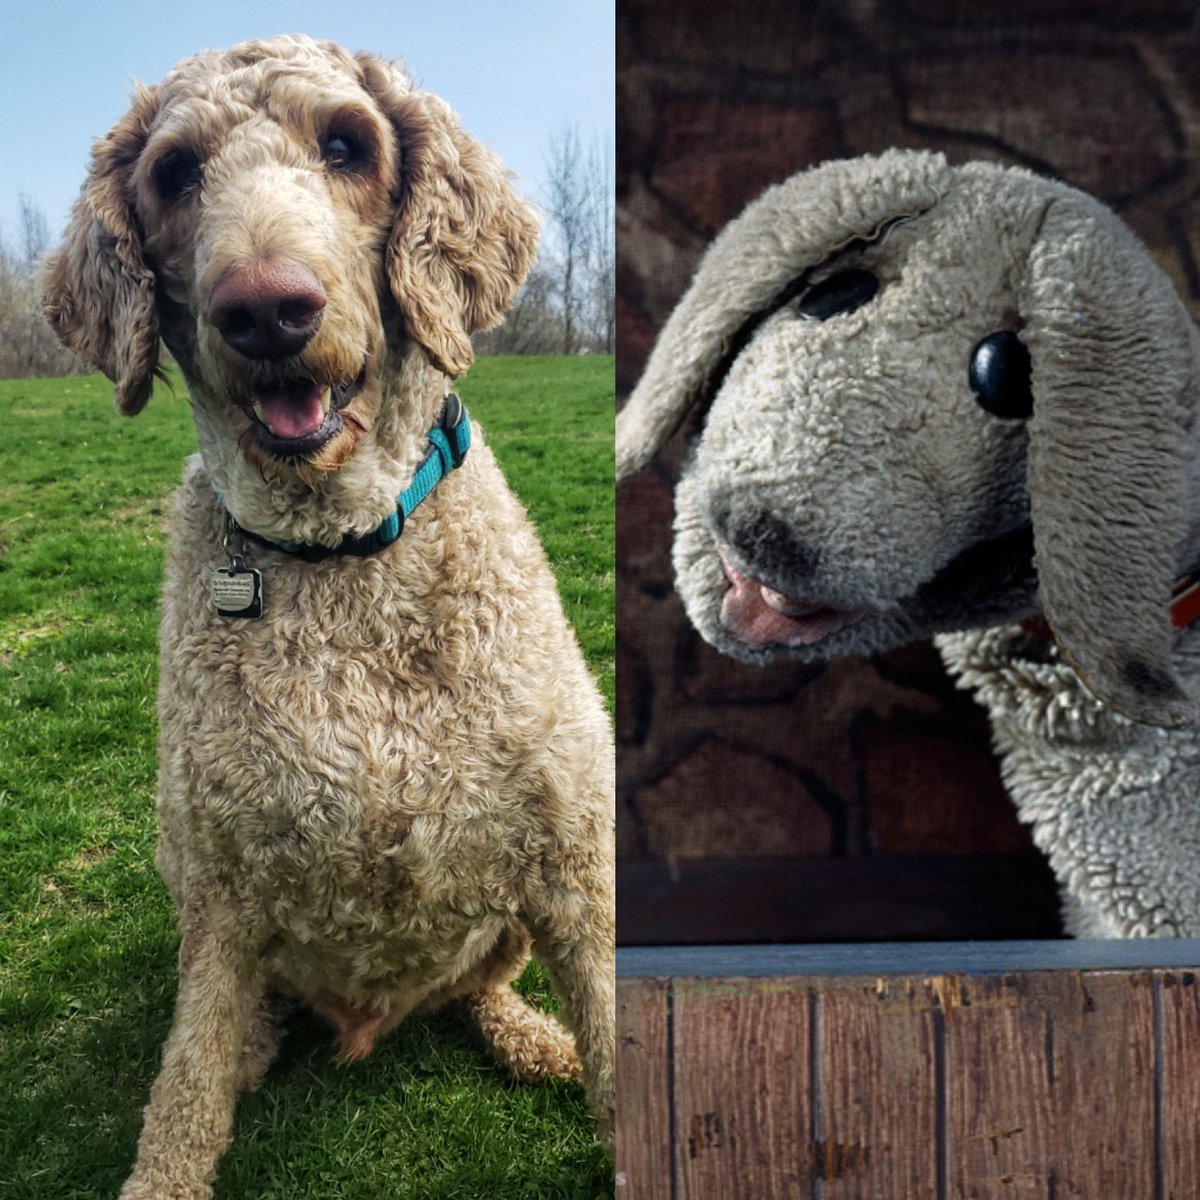 It has been suggested that Goose (sort of) resembles Finnigan from Mr Dressup - what do you think?
🤣❤🐾🐕🐶
#mrdressup #sillyGoose #greyGoose #friYAY #Fridayfun #walkinthedoginwhitby #walkinthedog